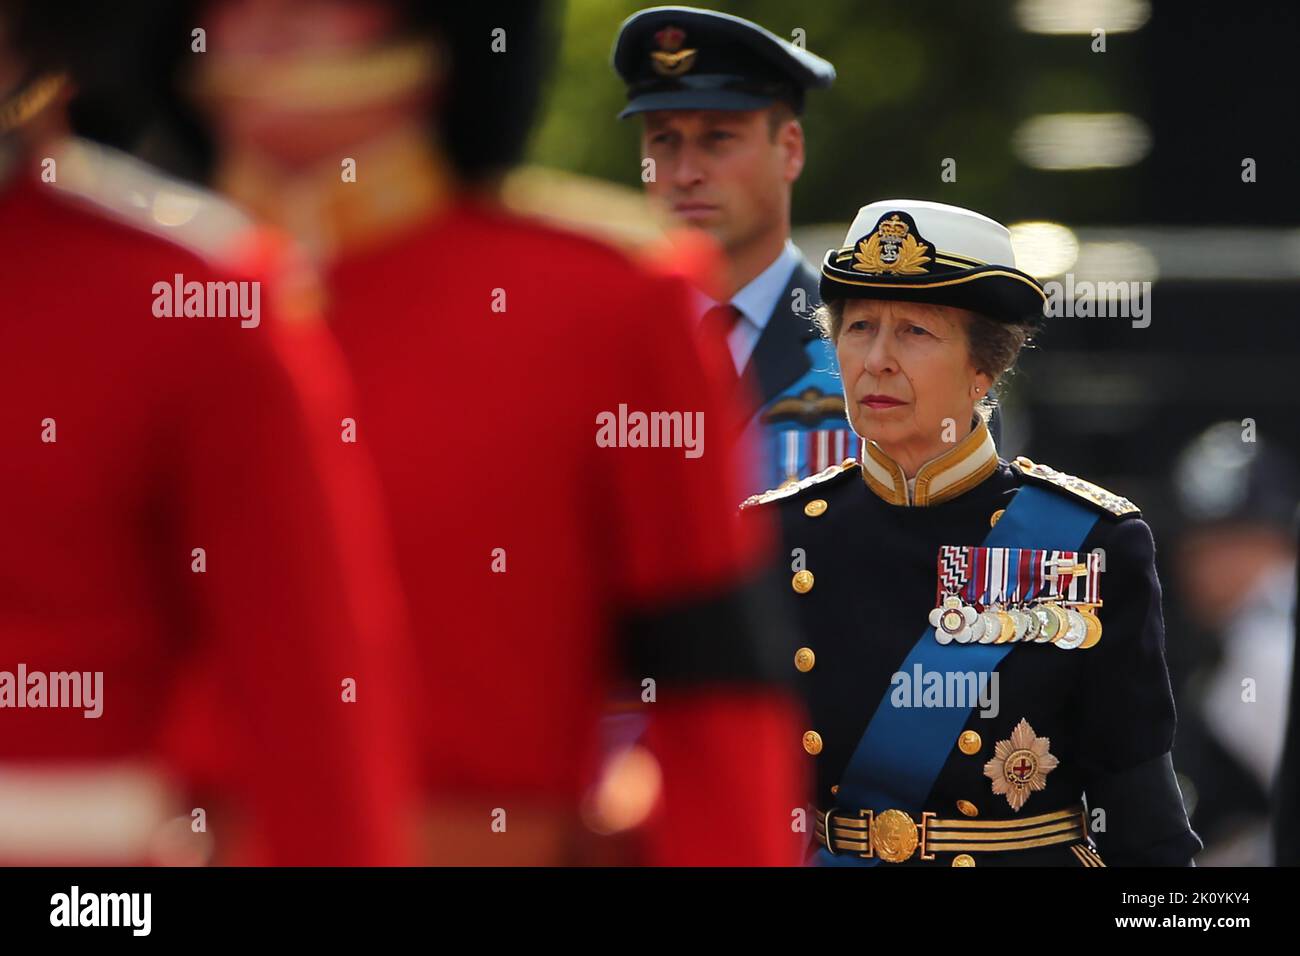 The Princess Royal and the Prince of Wales walk behind the coffin of Queen Elizabeth II during the ceremonial procession from Buckingham Palace to Westminster Hall, London, where it will lie in state ahead of her funeral on Monday. Picture date: Wednesday September 14, 2022. Stock Photo